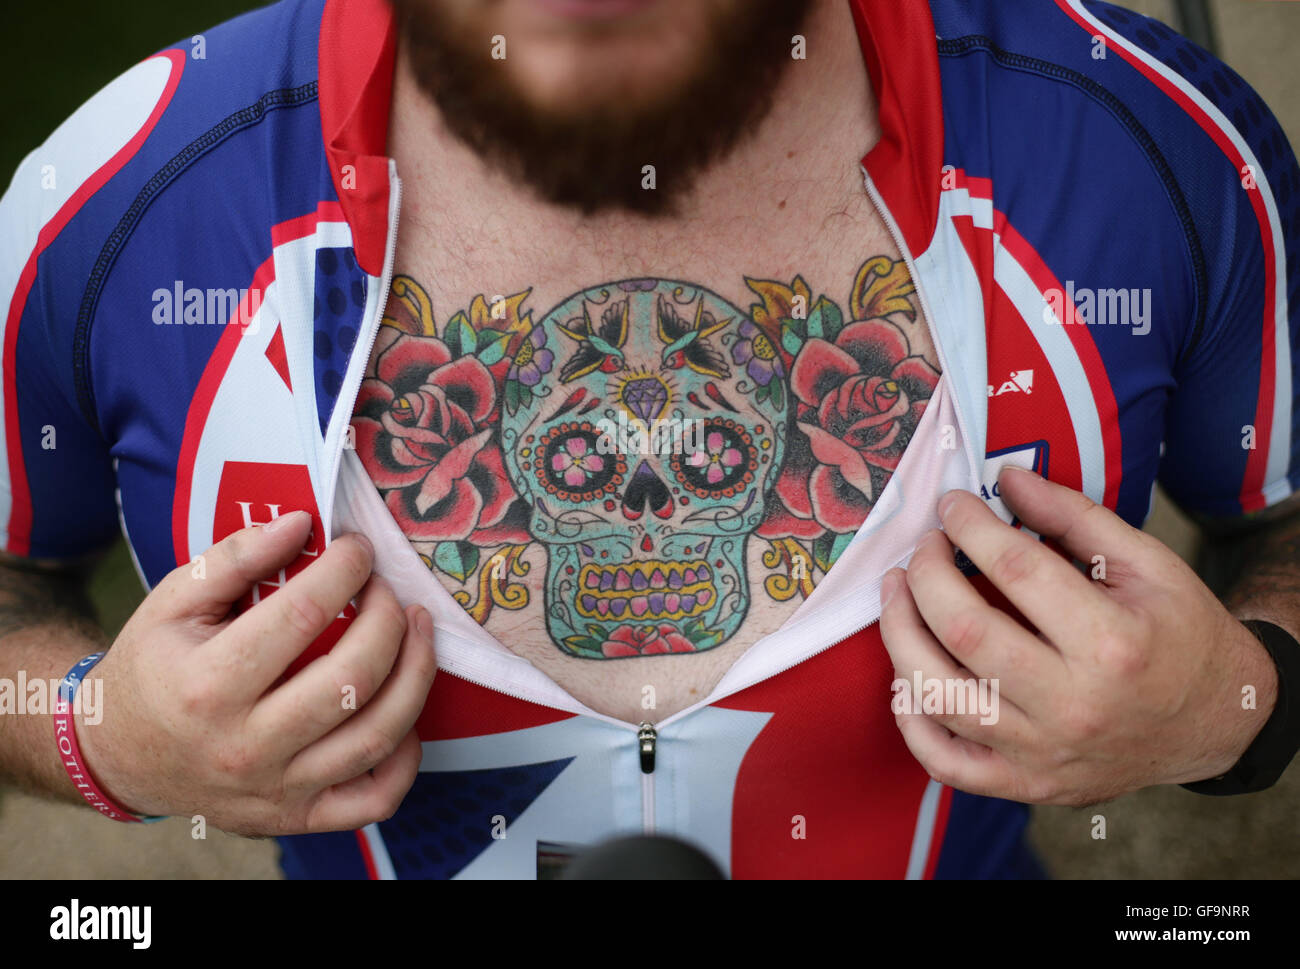 Competitor Clive Smith shows off his chest tattoo during the Prudential RideLondon Grand Prix at the Lee Valley VeloPark, Queen Elizabeth Olympic Park, in London. Stock Photo